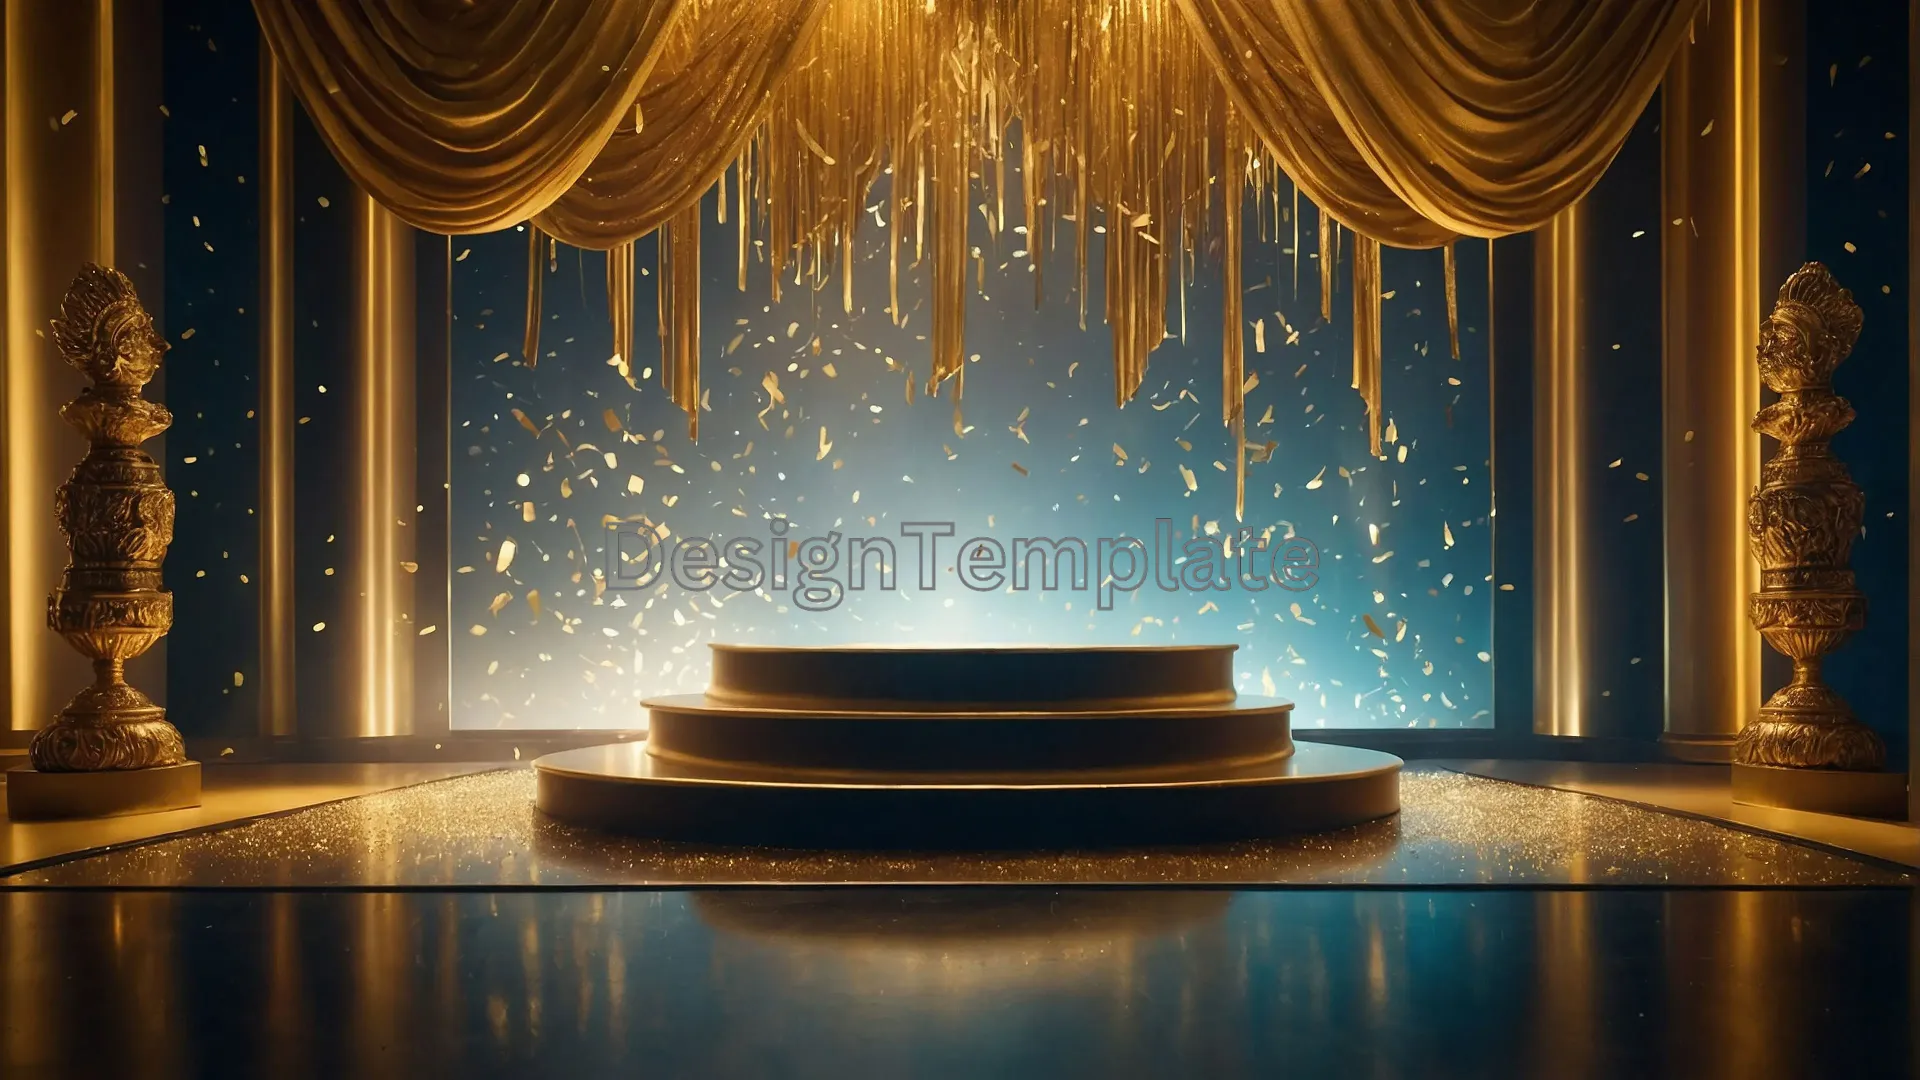 Gilded Image Award Show Stage Glows with Fresh Theme Golden Fabric